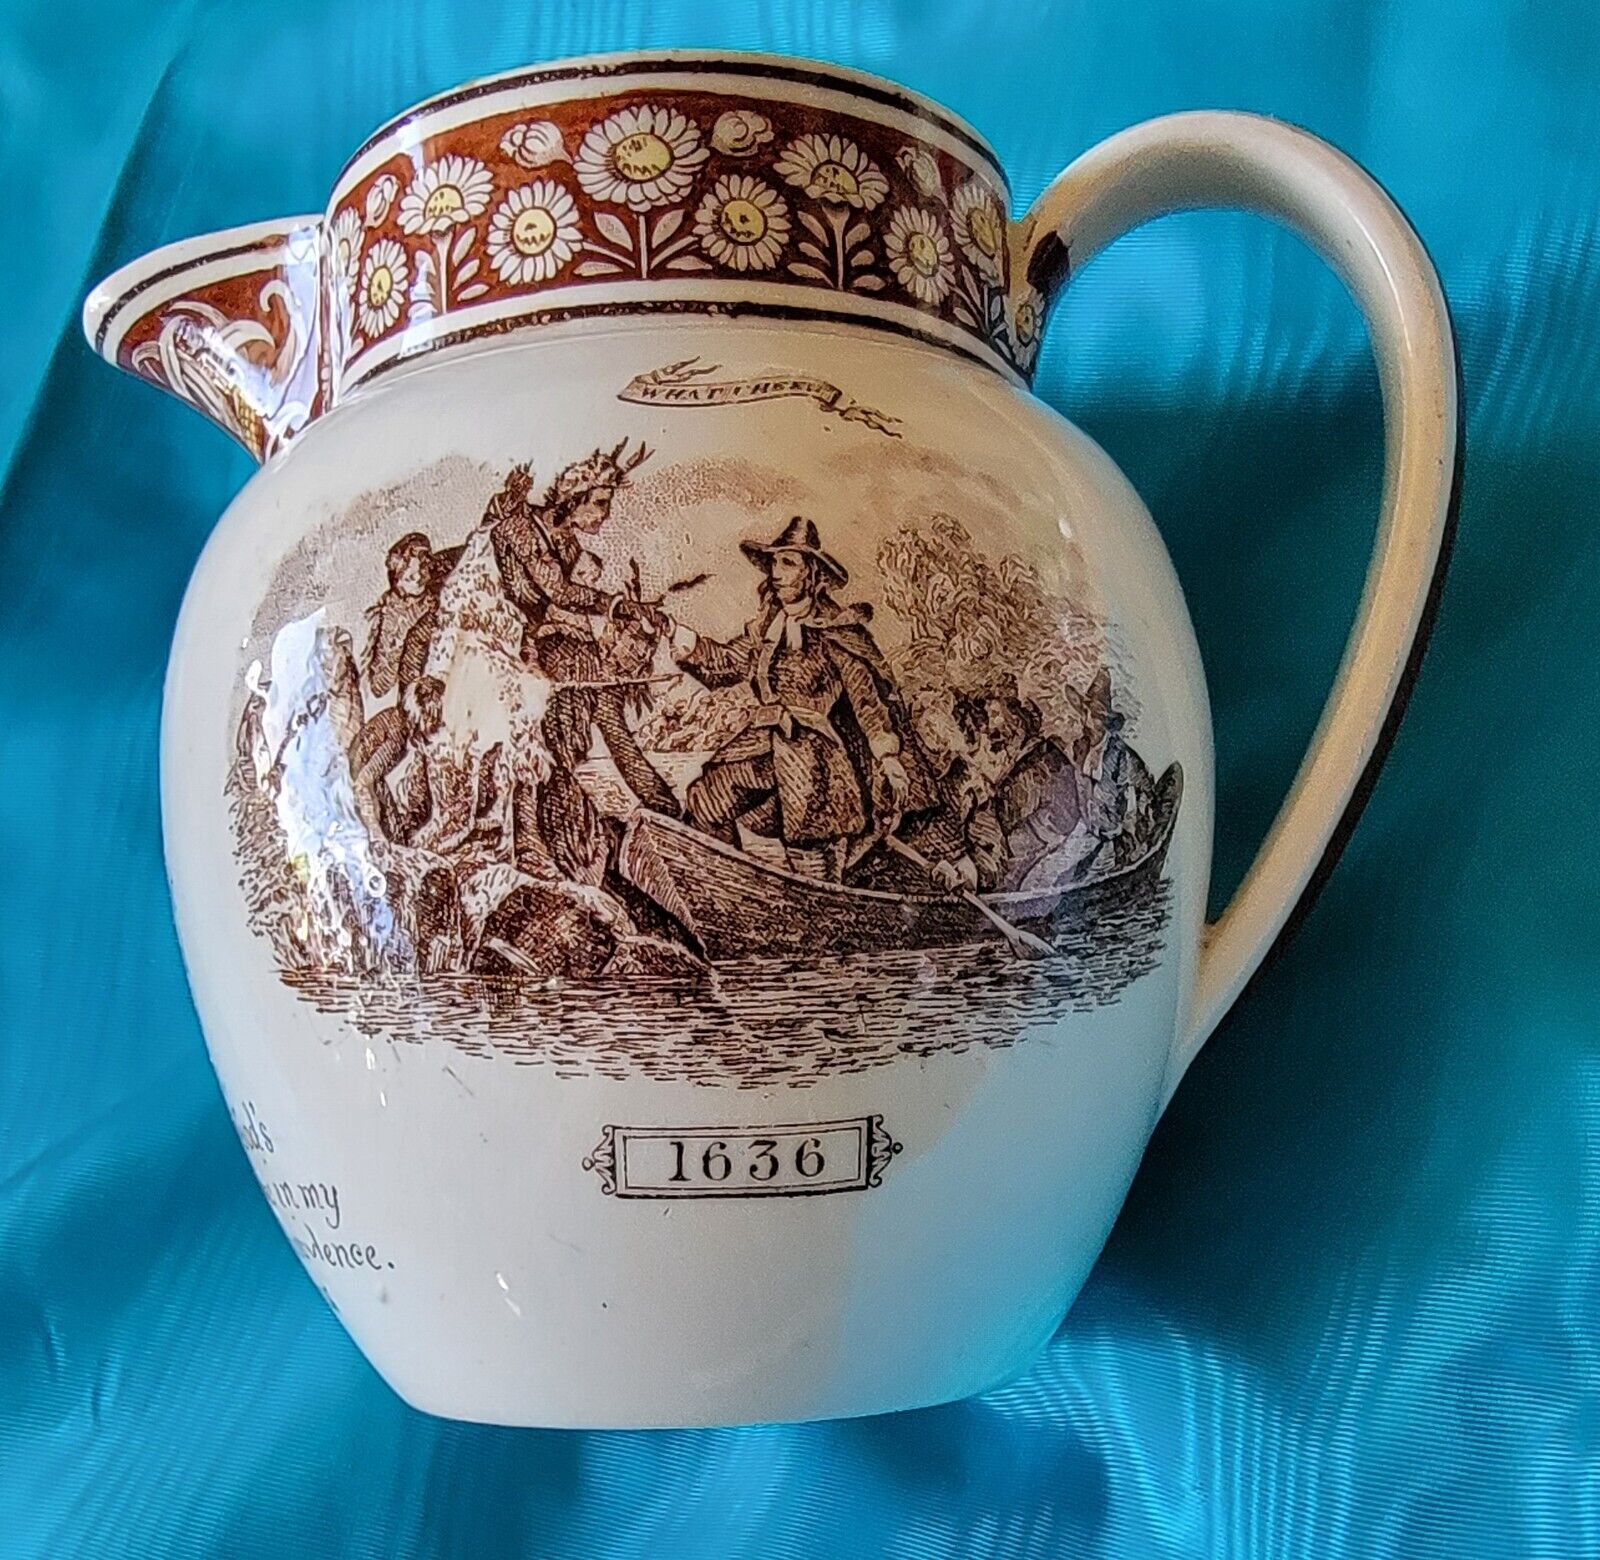 Wedgewood Jug  - Roger Williams J. Wedgewood & Sons  Great Condition